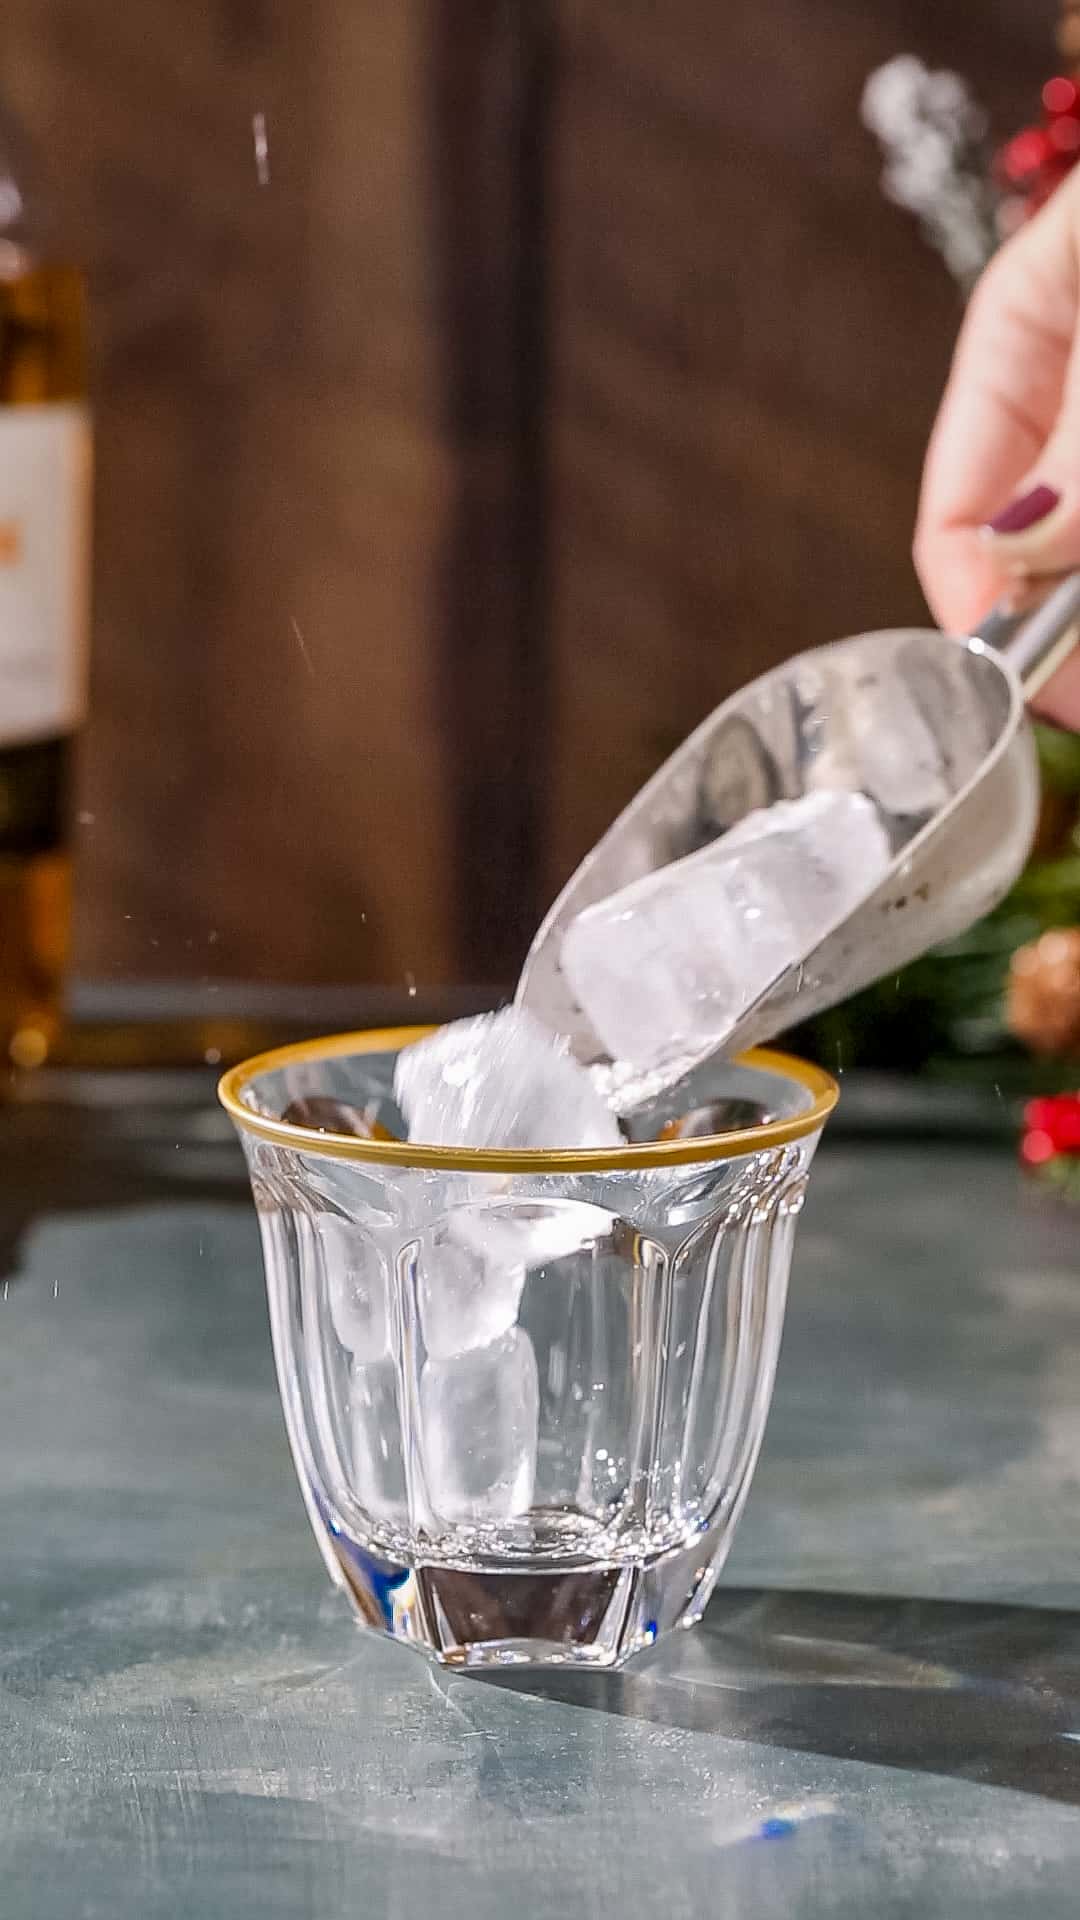 Hand using an ice scoop to add ice to a gold-rimmed old fashioned glass.